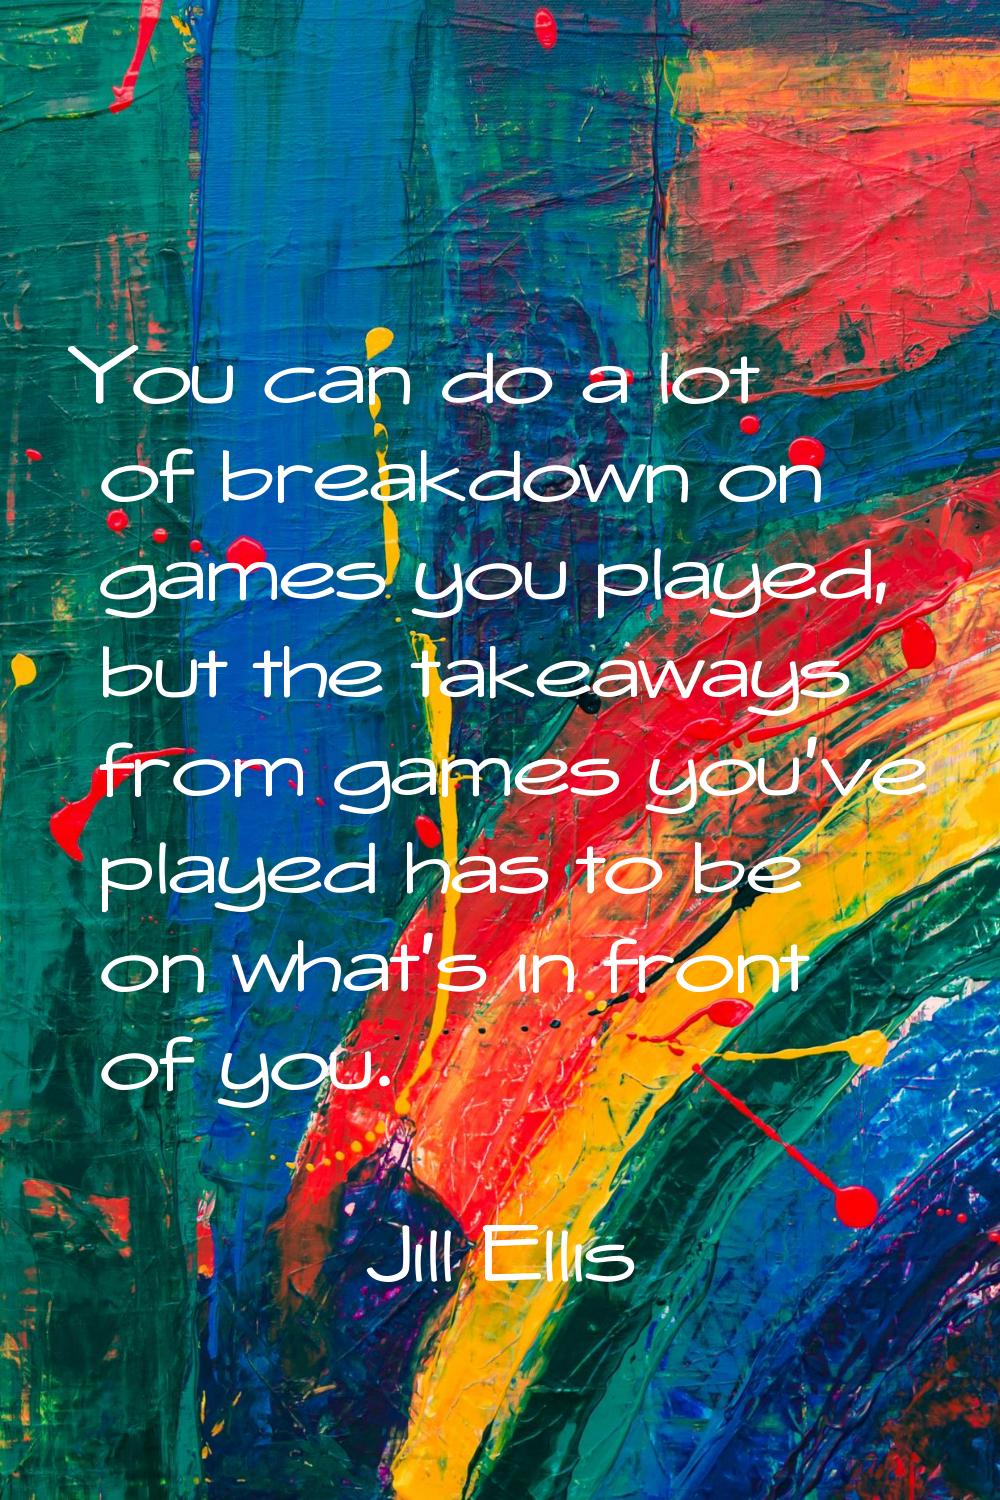 You can do a lot of breakdown on games you played, but the takeaways from games you've played has t